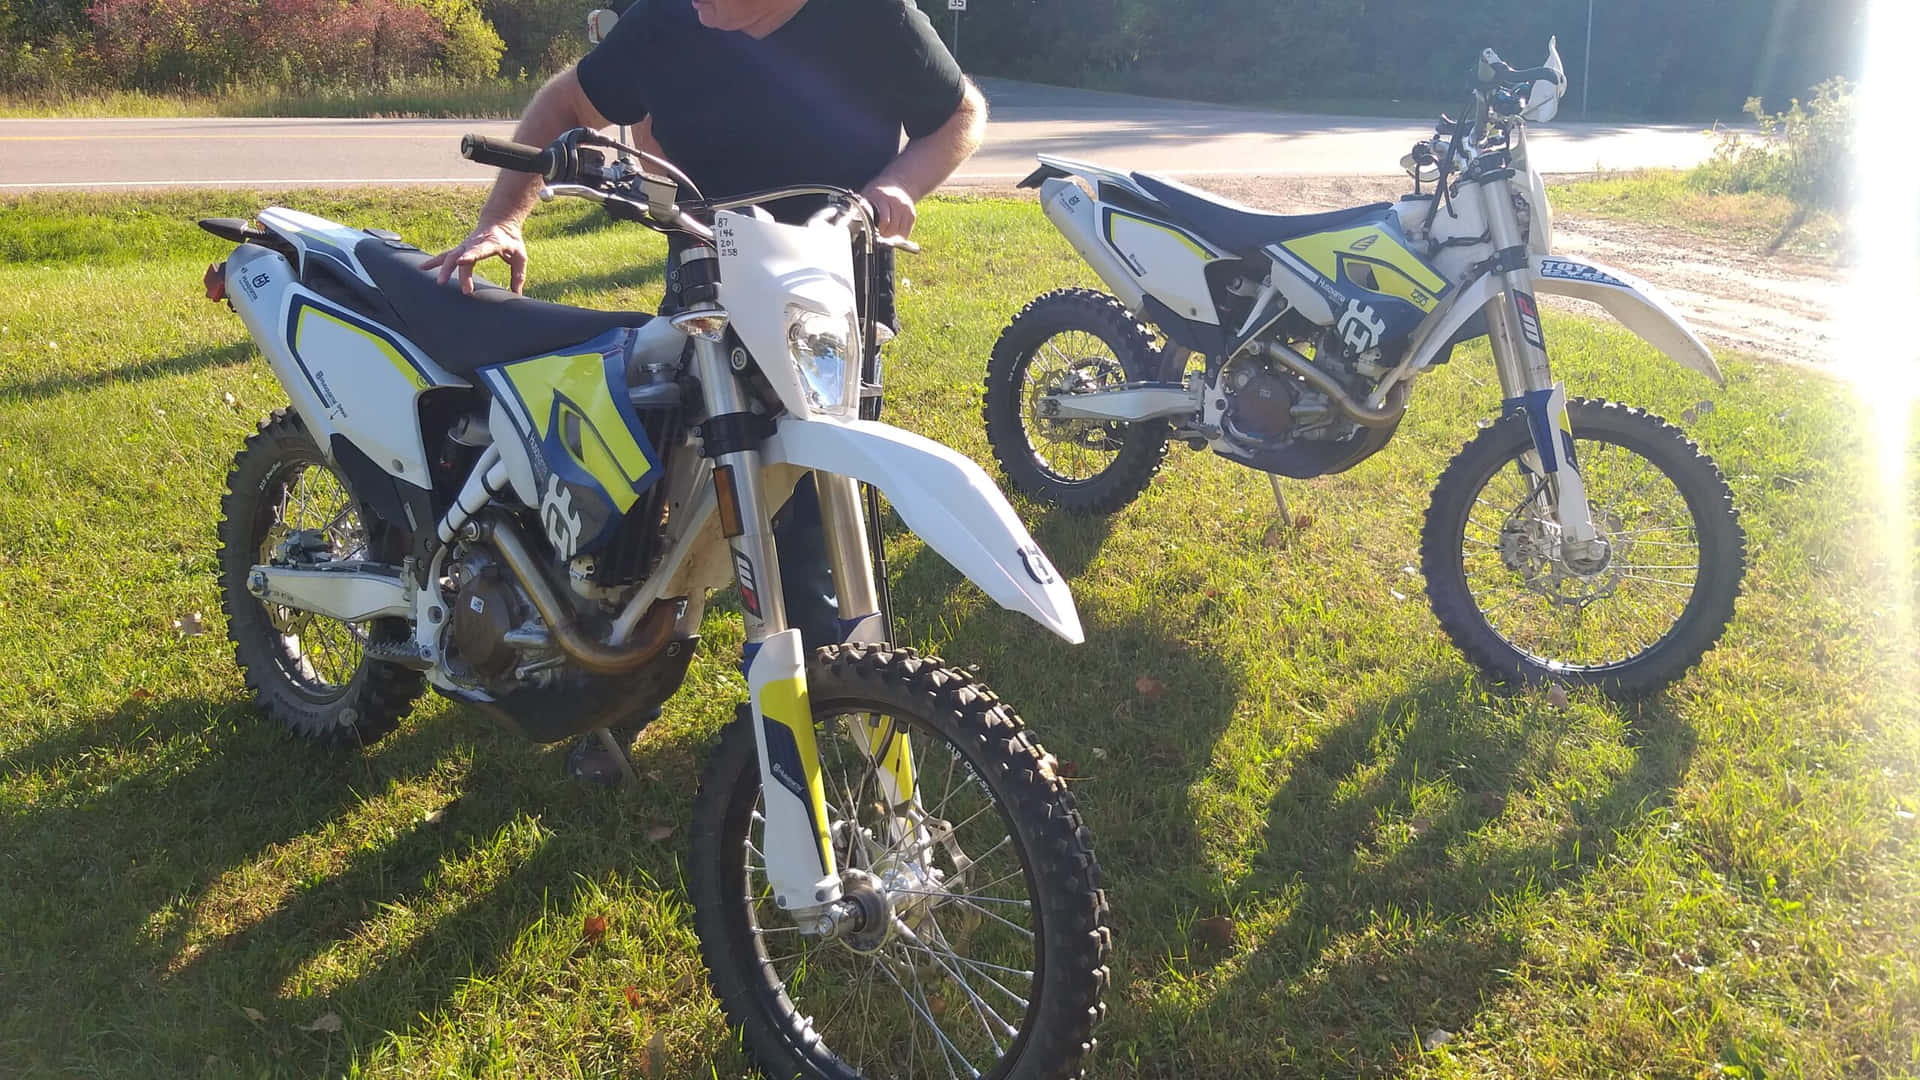 Two Dirt Bikes Parked On The Grass